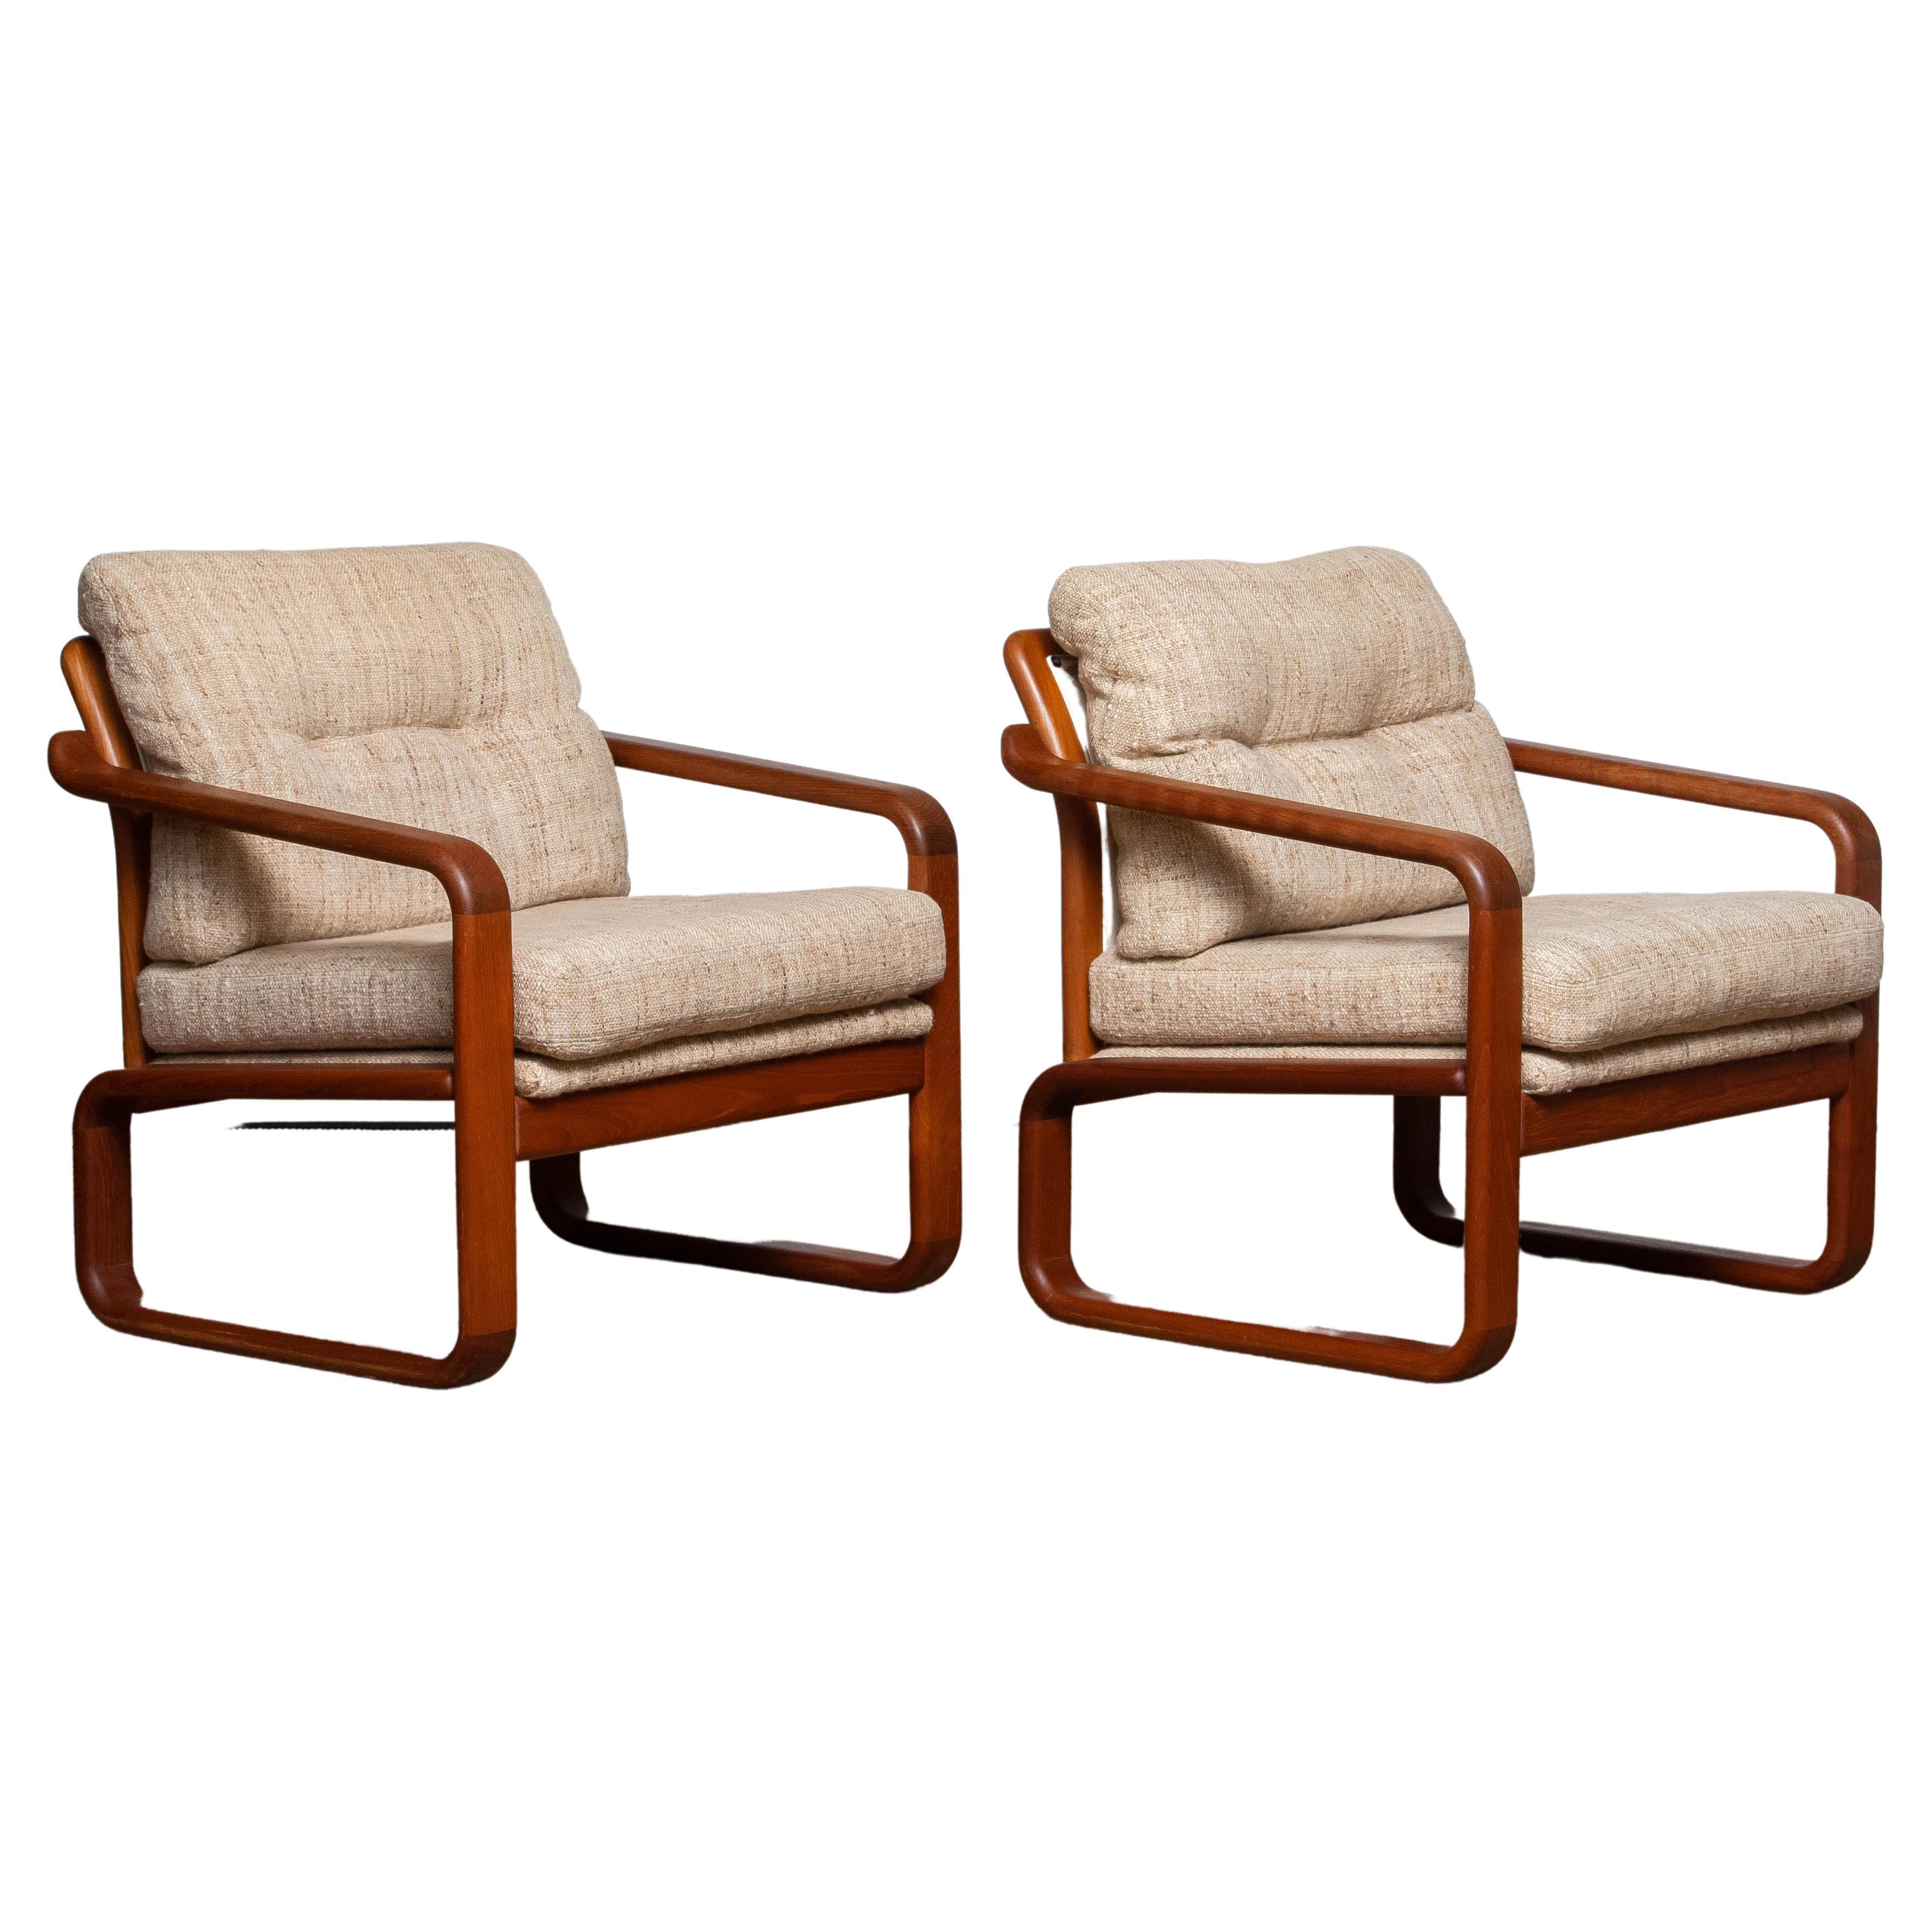 1980's Pair Teak with Wool Cushions Lounge / Easy Chair by HS Design, Denmark